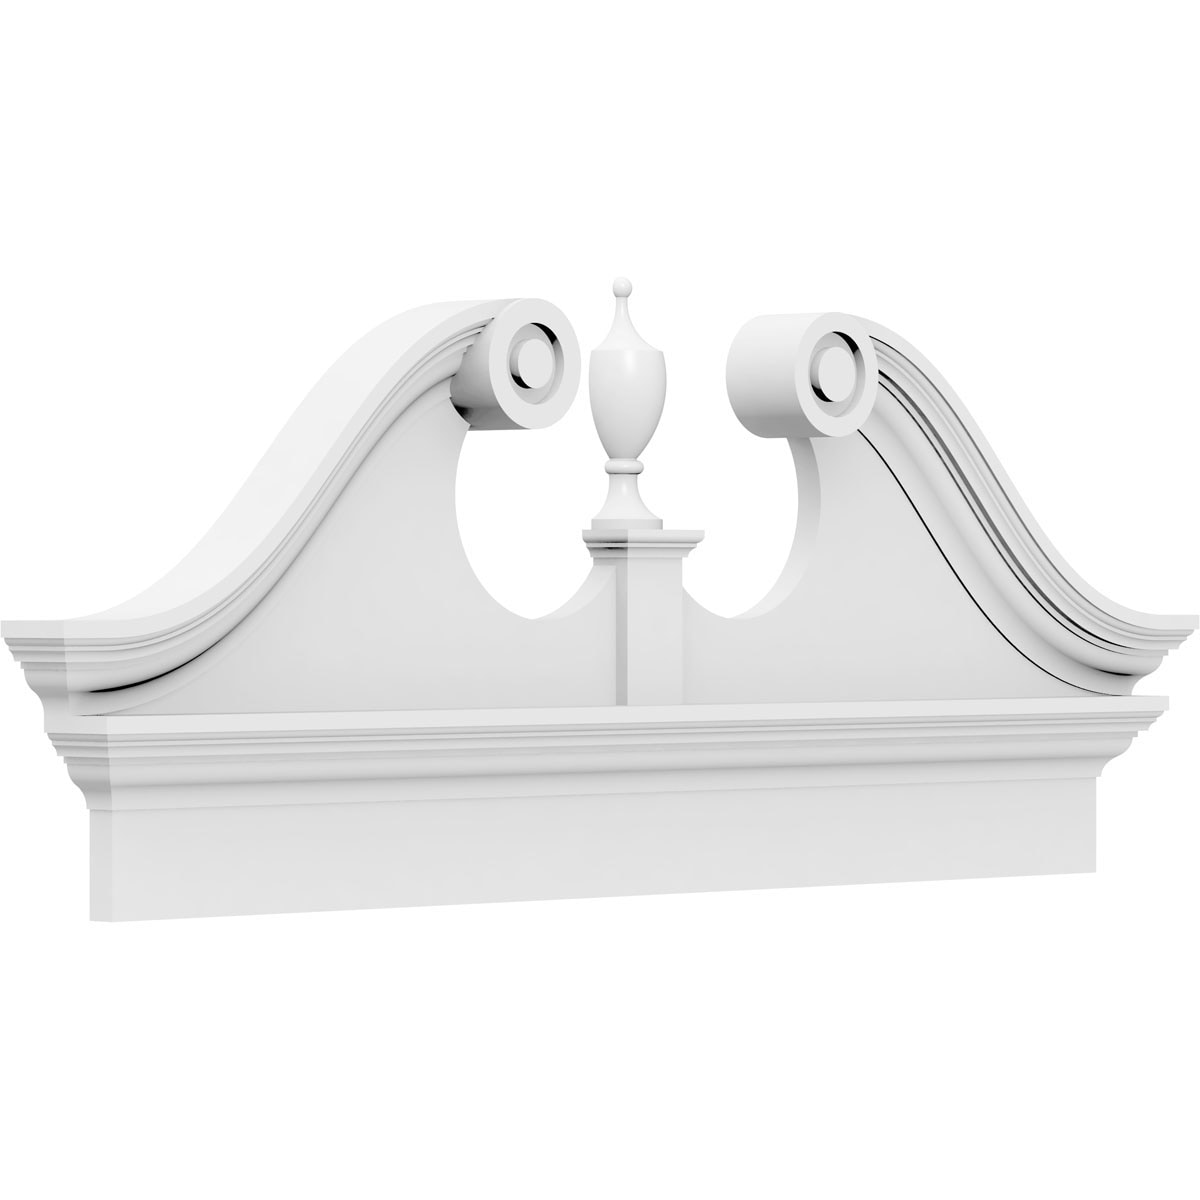 Ekena Millwork Rams Head 6-ft 4-in x 25-7/8-in Unfinished PVC Pediment Entry Door Casing Accent in White | PEDPC076X260RHP00